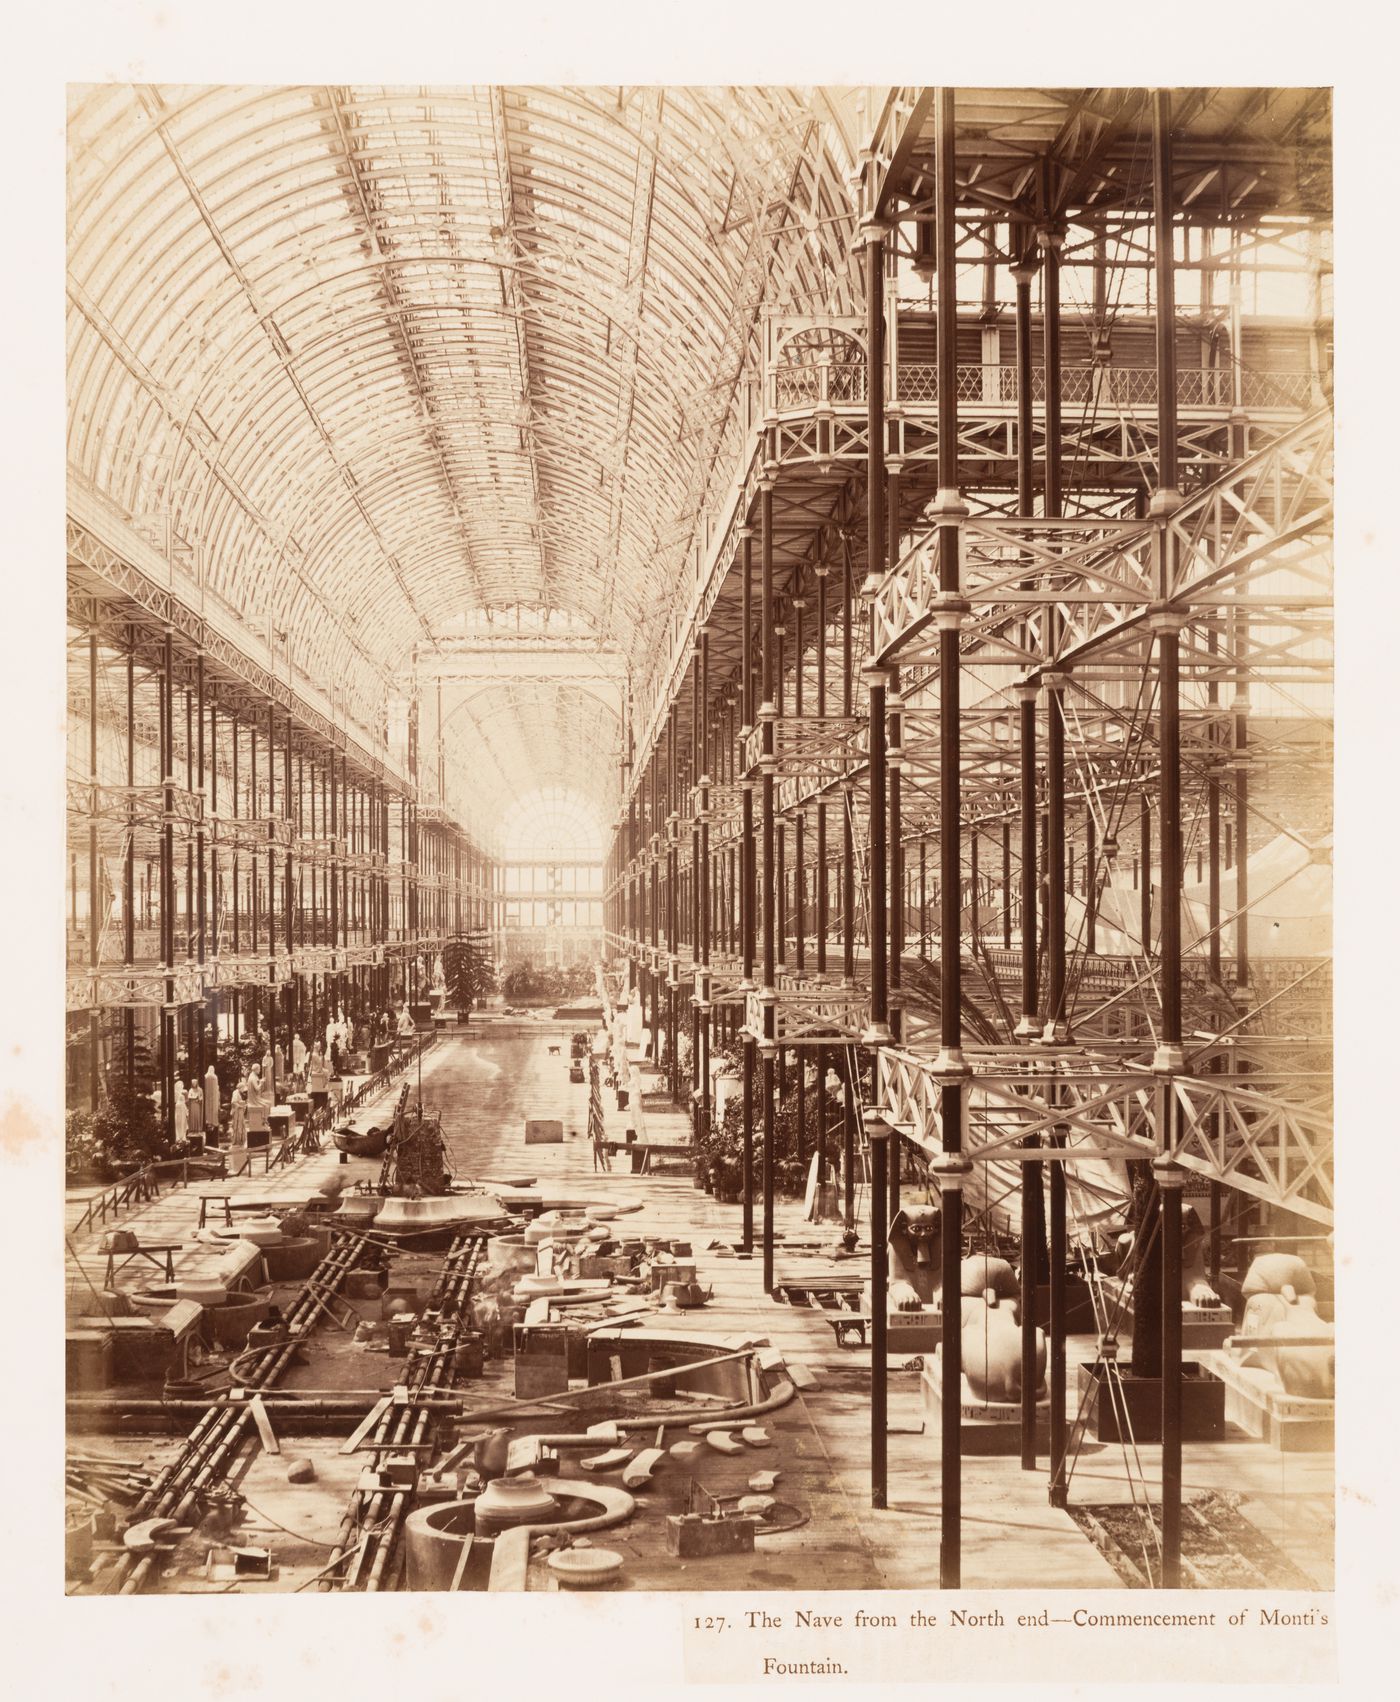 The Nave from the north end and commencement of Monti's Fountain, Crystal Palace, Sydenham, England